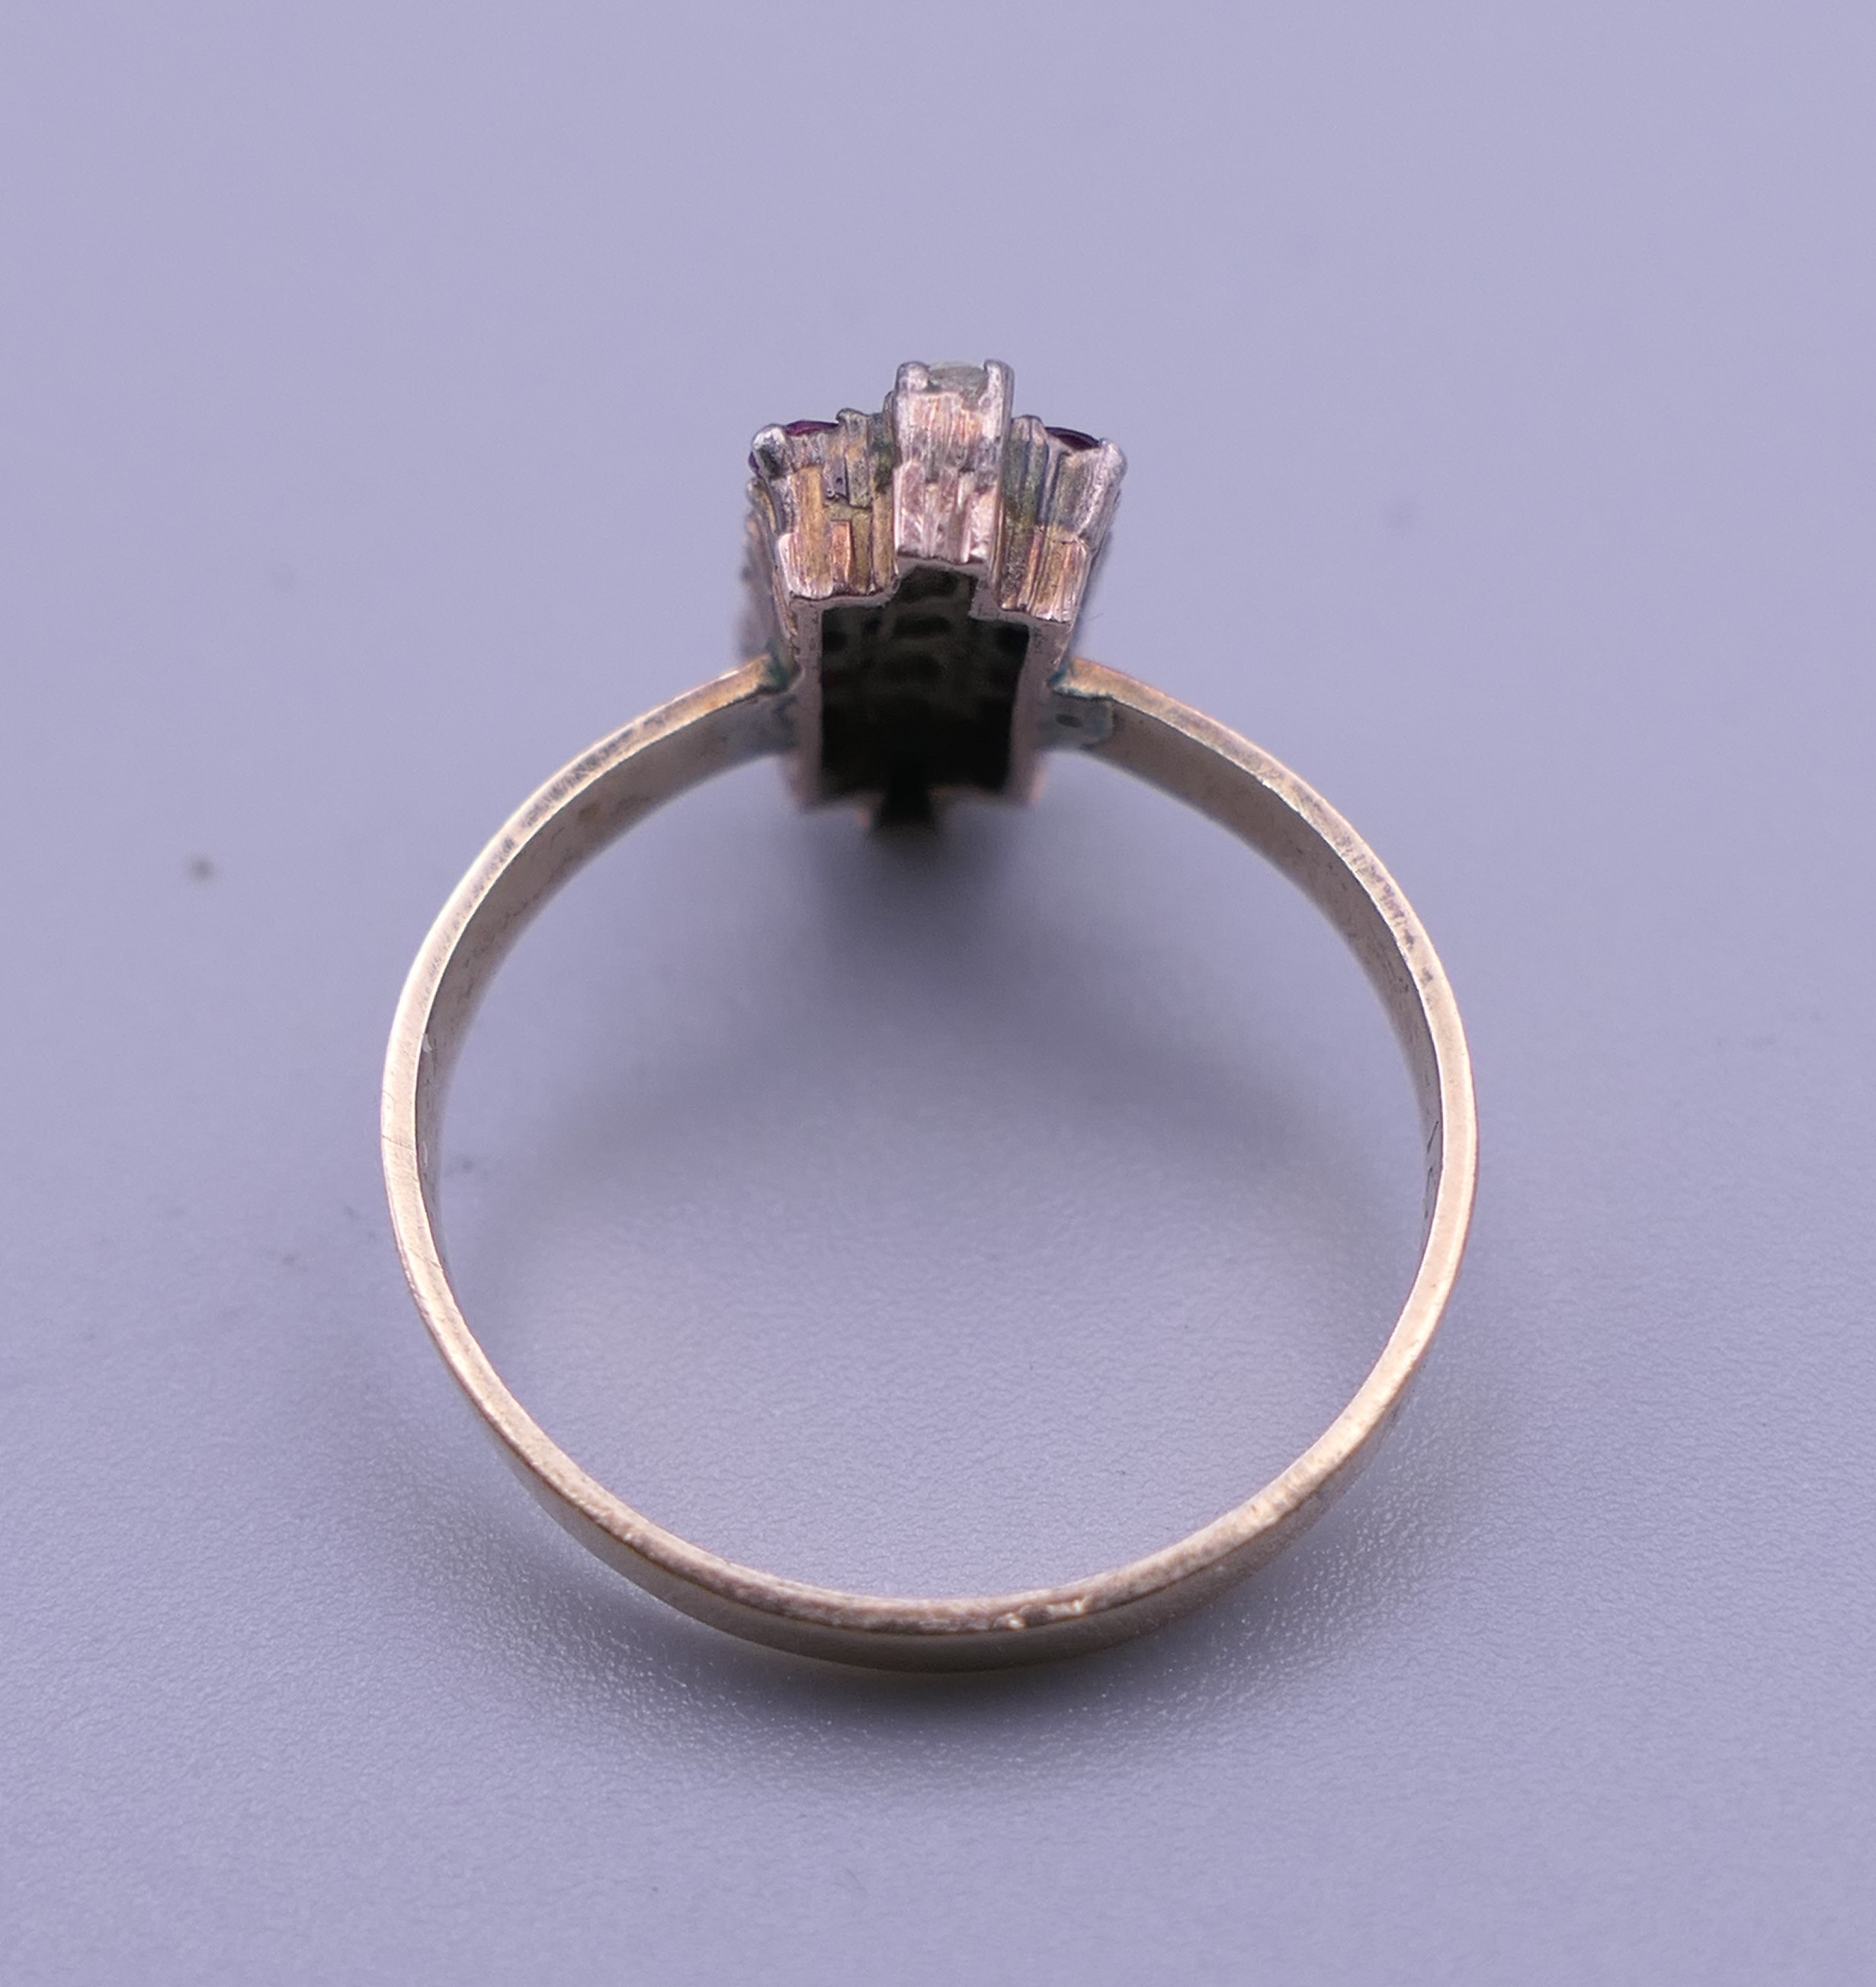 An 18 K gold ring. Ring size L/M. 2.1 grammes total weight. - Image 4 of 6